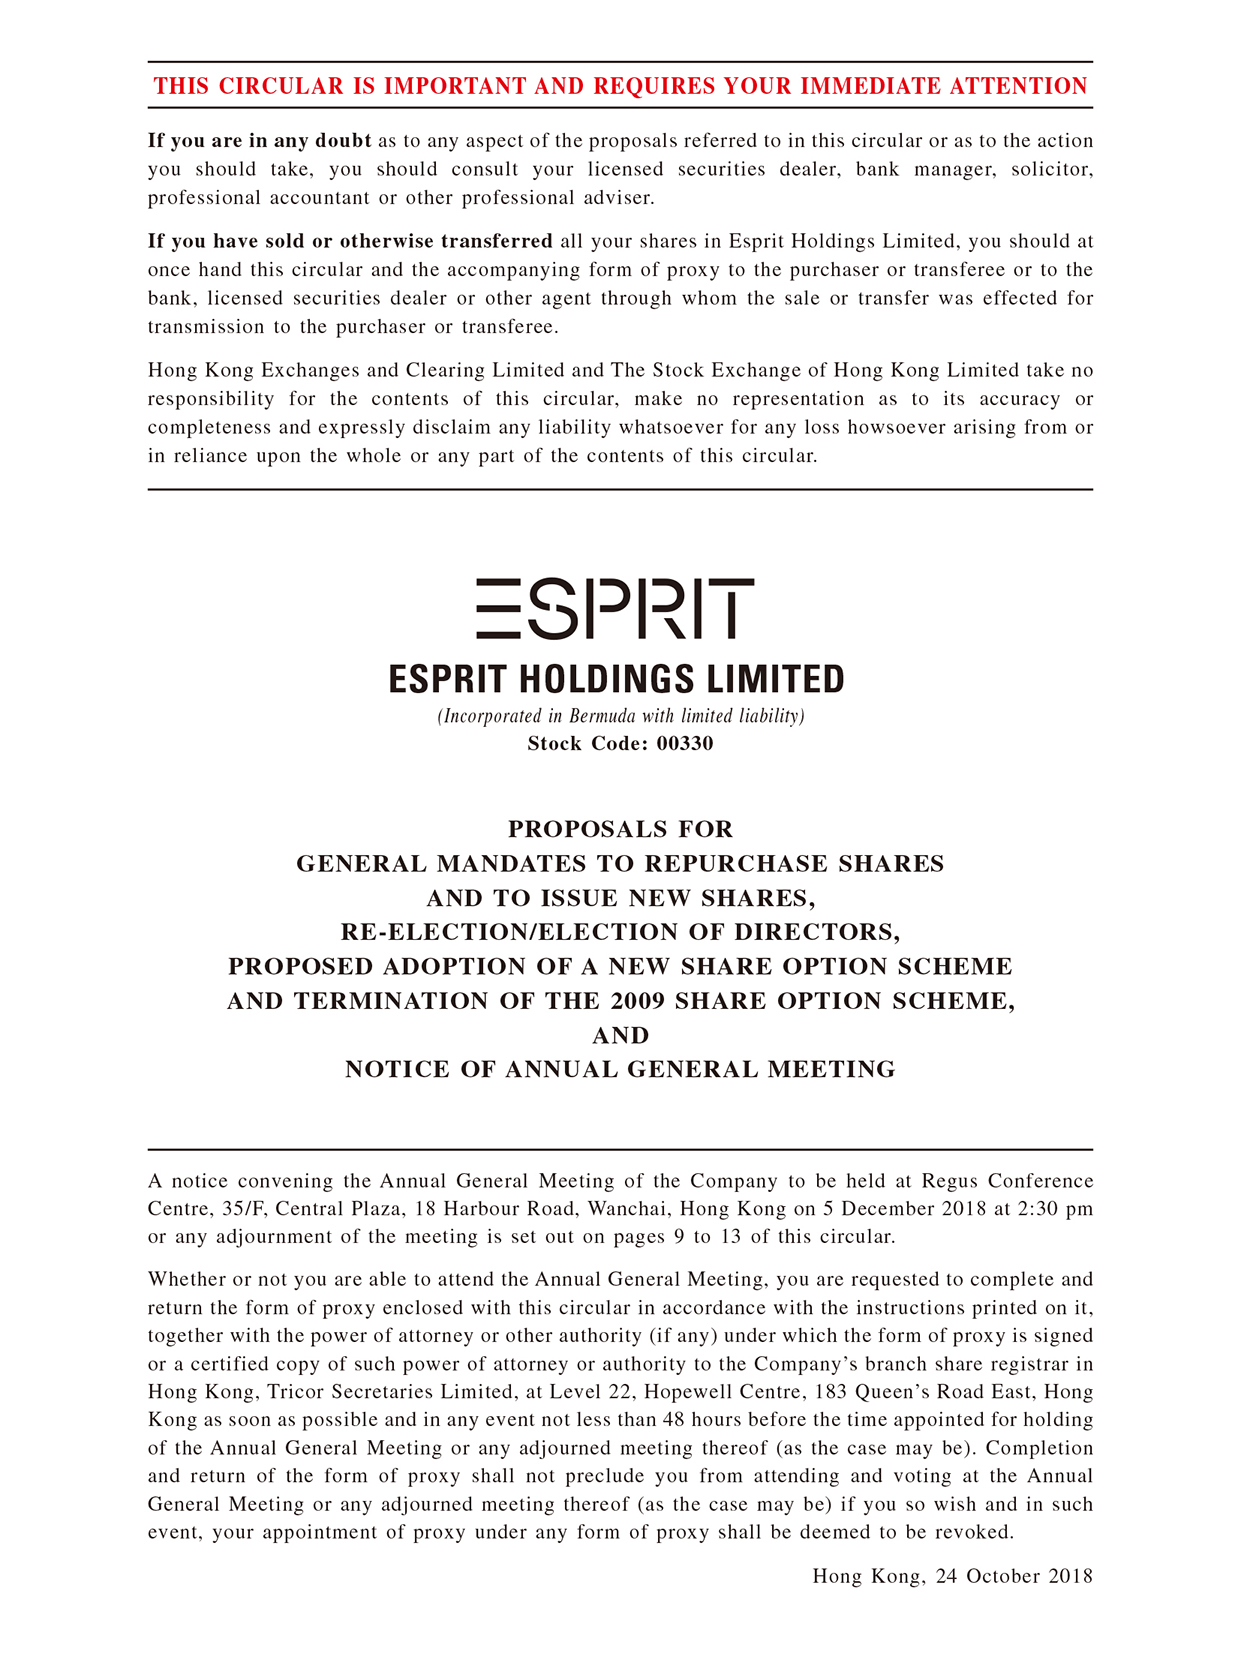 ESPRIT Holdings Limited